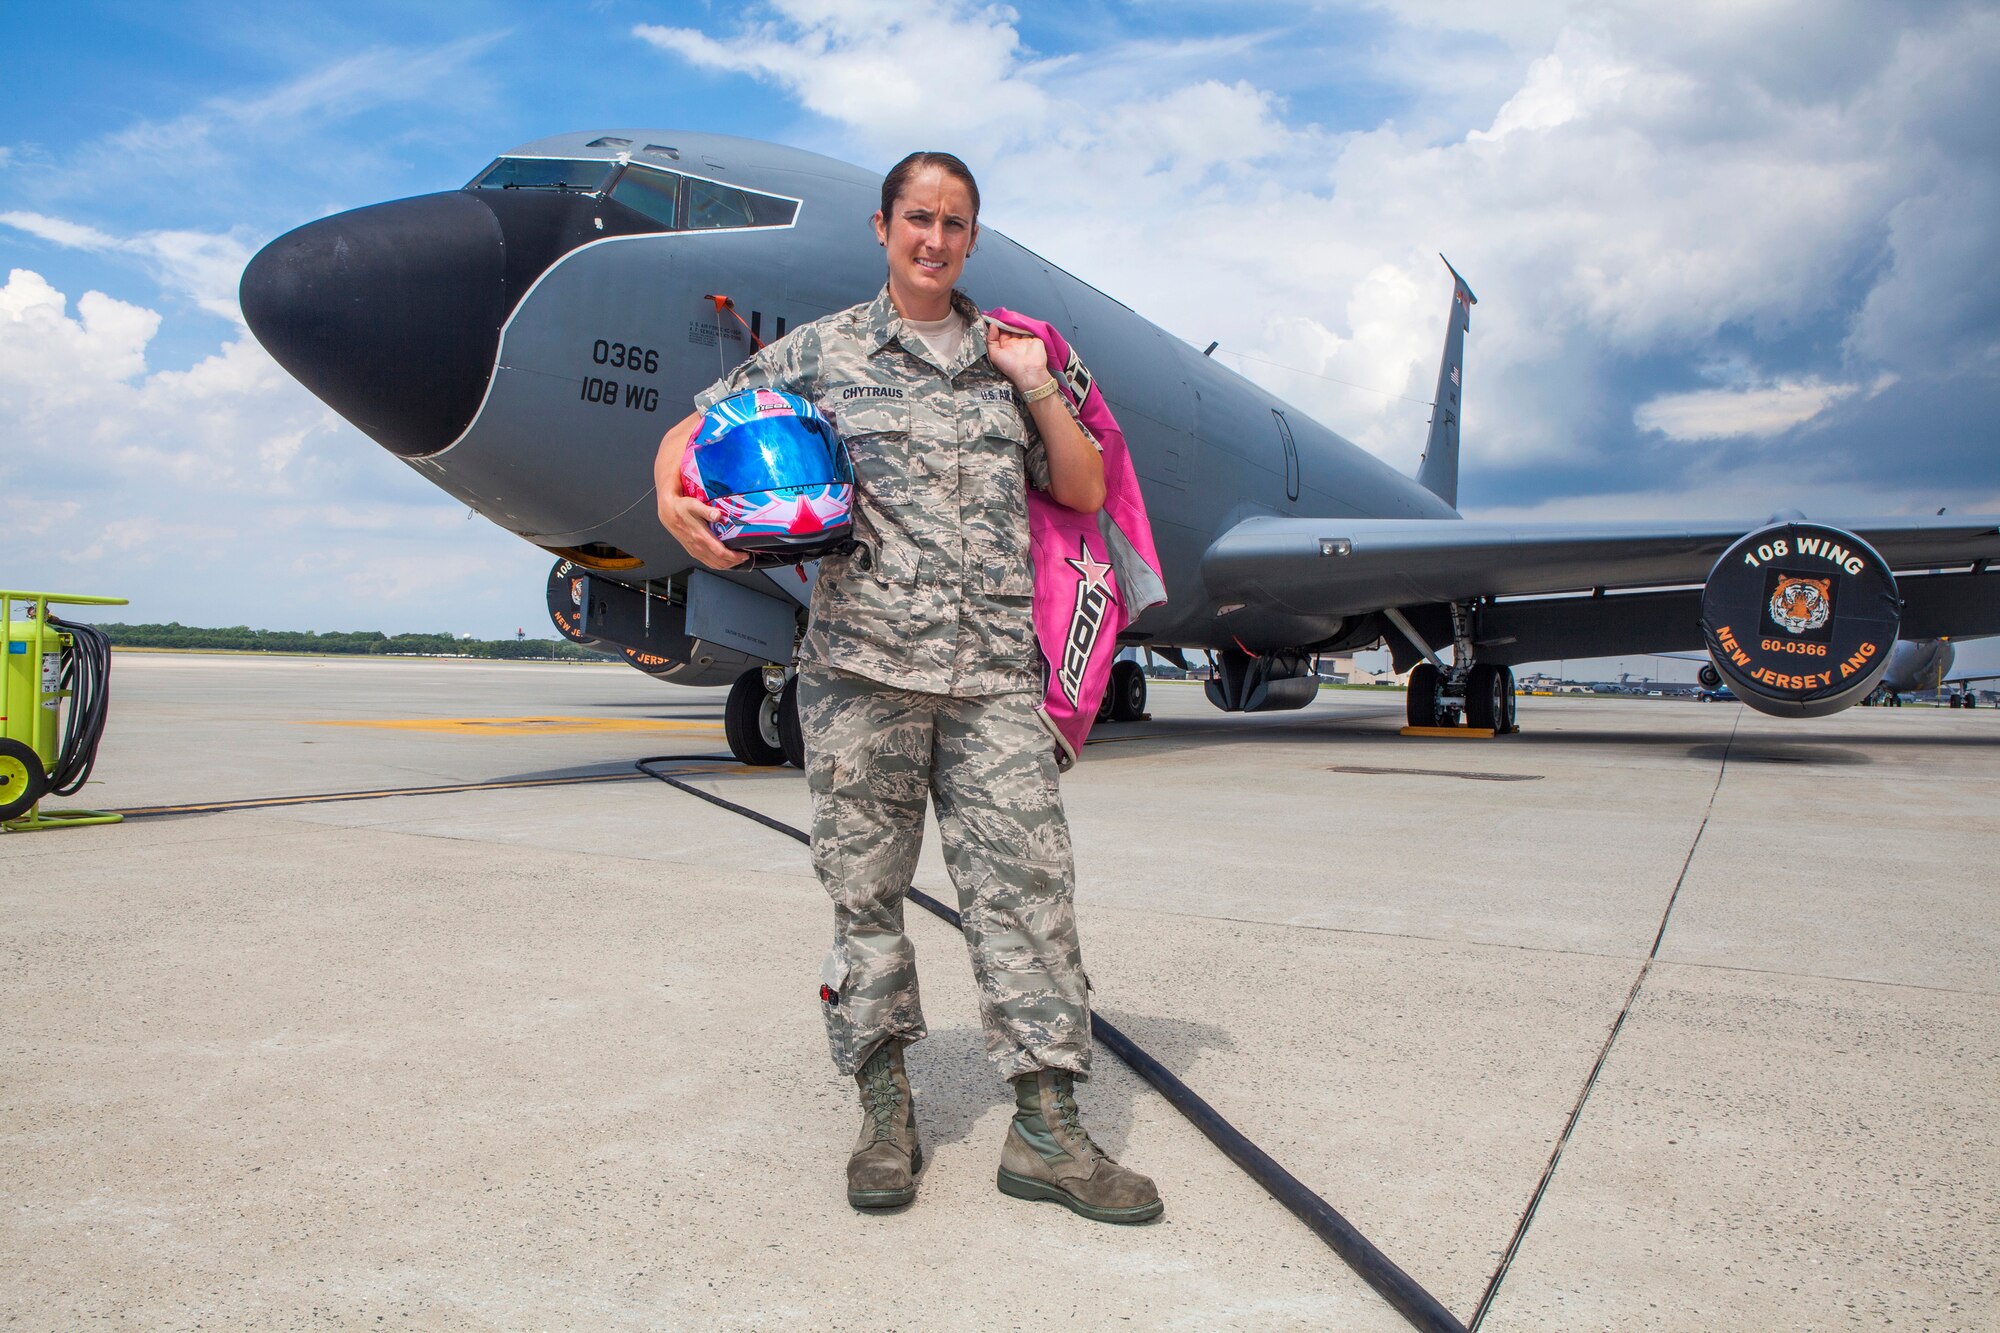 Senior Airman Ashley V. Chytraus, a crew chief with the 108th Wing, New Jersey Air National Guard, holds her personal protective equipment in front of a KC-135R Stratotanker at Joint Base McGuire-Dix-Lakehurst, N.J., June 16, 2015. Chytraus was in a motorcycle accident June 21, 2014. The collision broke two vertebrae in Chytraus’s neck, crushed her hand, mangled the quadriceps tendon in her leg, forced two splintered ribs into her liver and fractured her elbow. In addition, she died while being medevaced to the hospital. 358 days later, she passed all portions of the Air Force Physical Fitness Test and received an excellent. (U.S. Air Force photo by Master Sgt. Mark C. Olsen/Released)